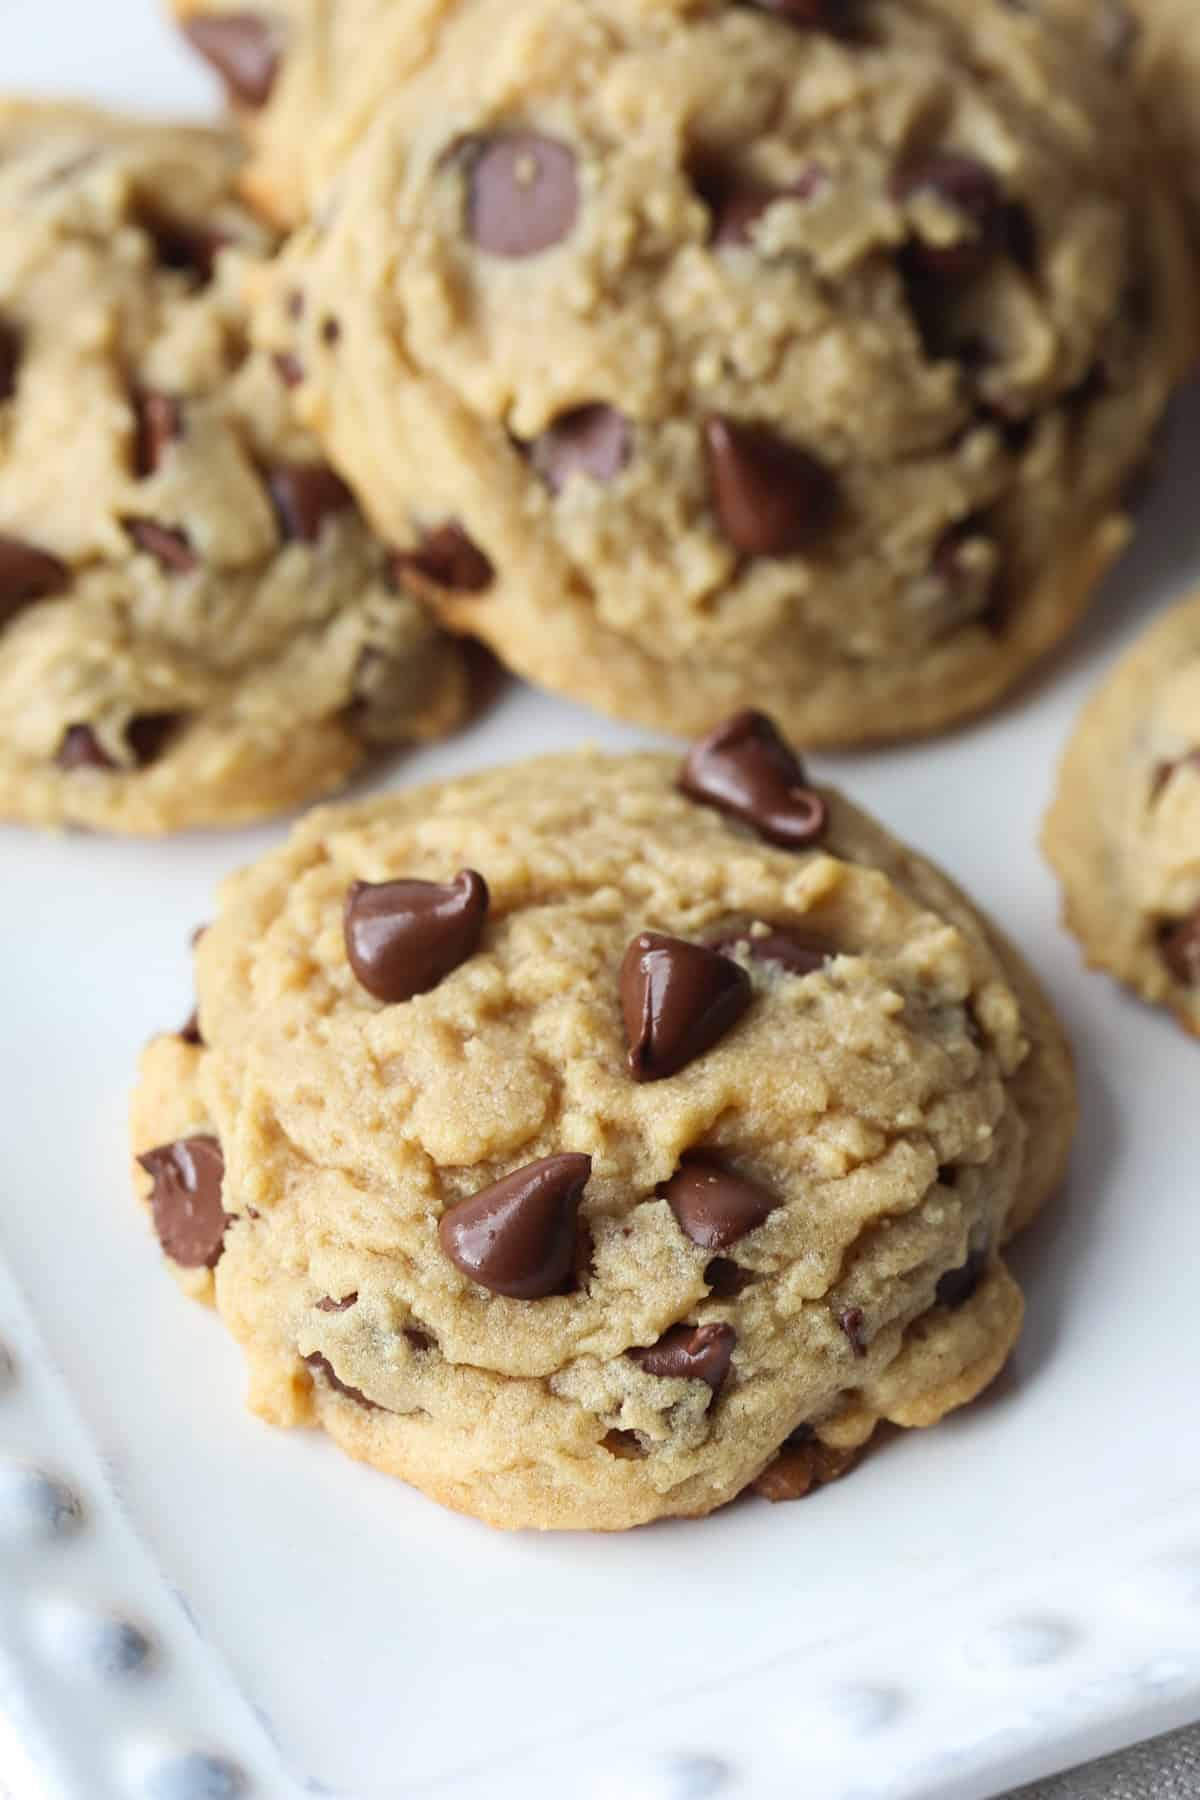 Peanut butter cookies with chocolate chips on a white plate.